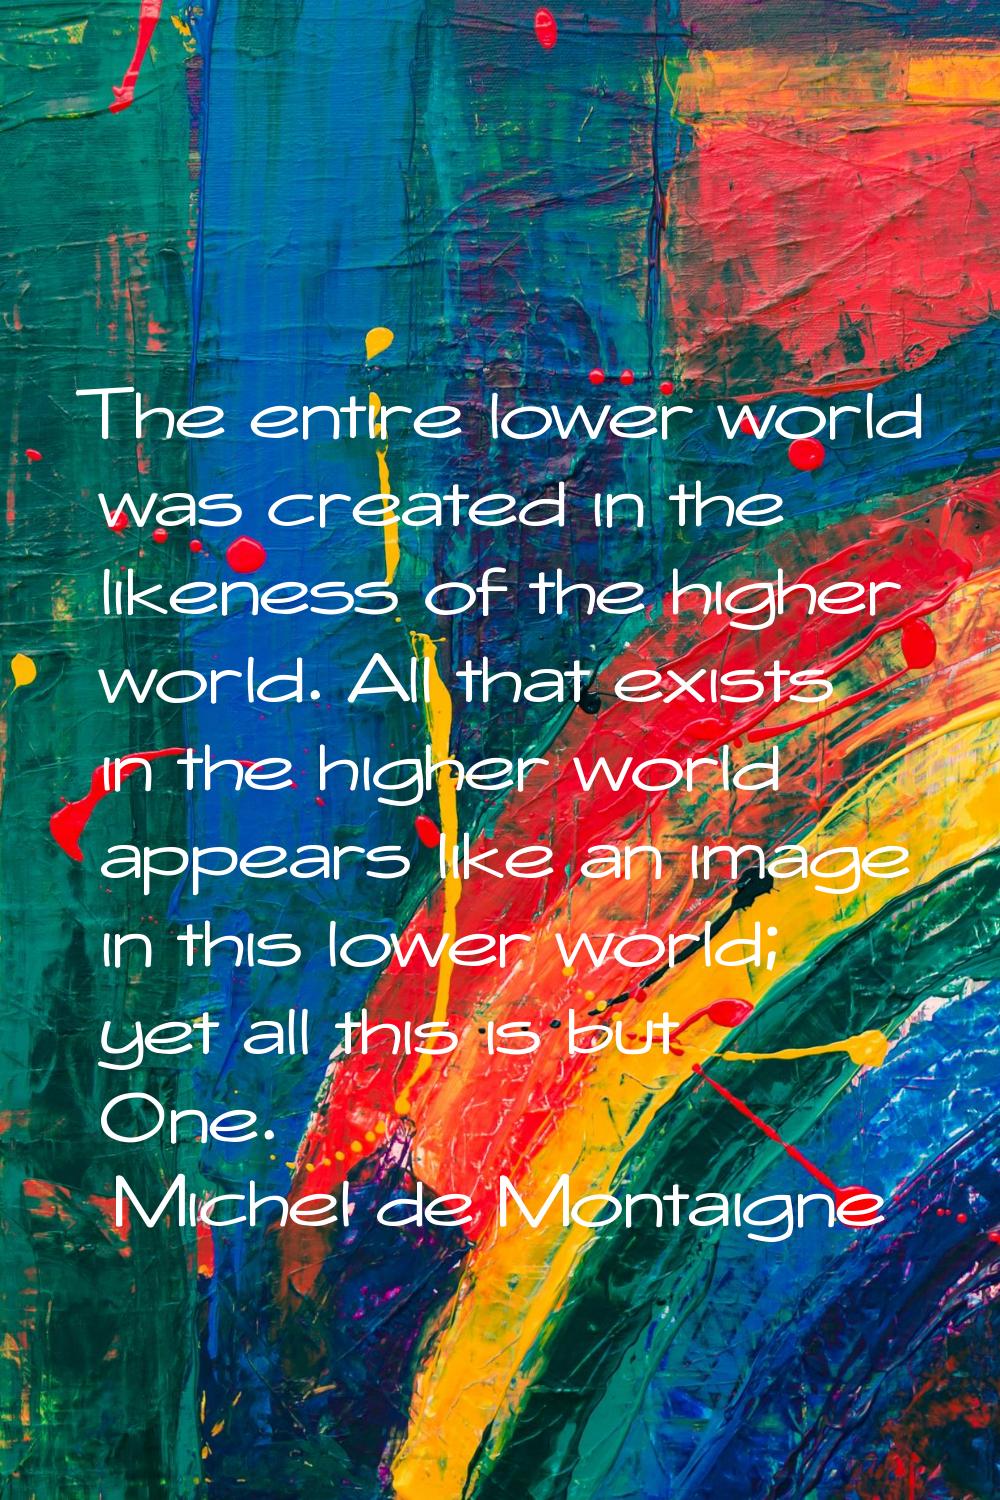 The entire lower world was created in the likeness of the higher world. All that exists in the high